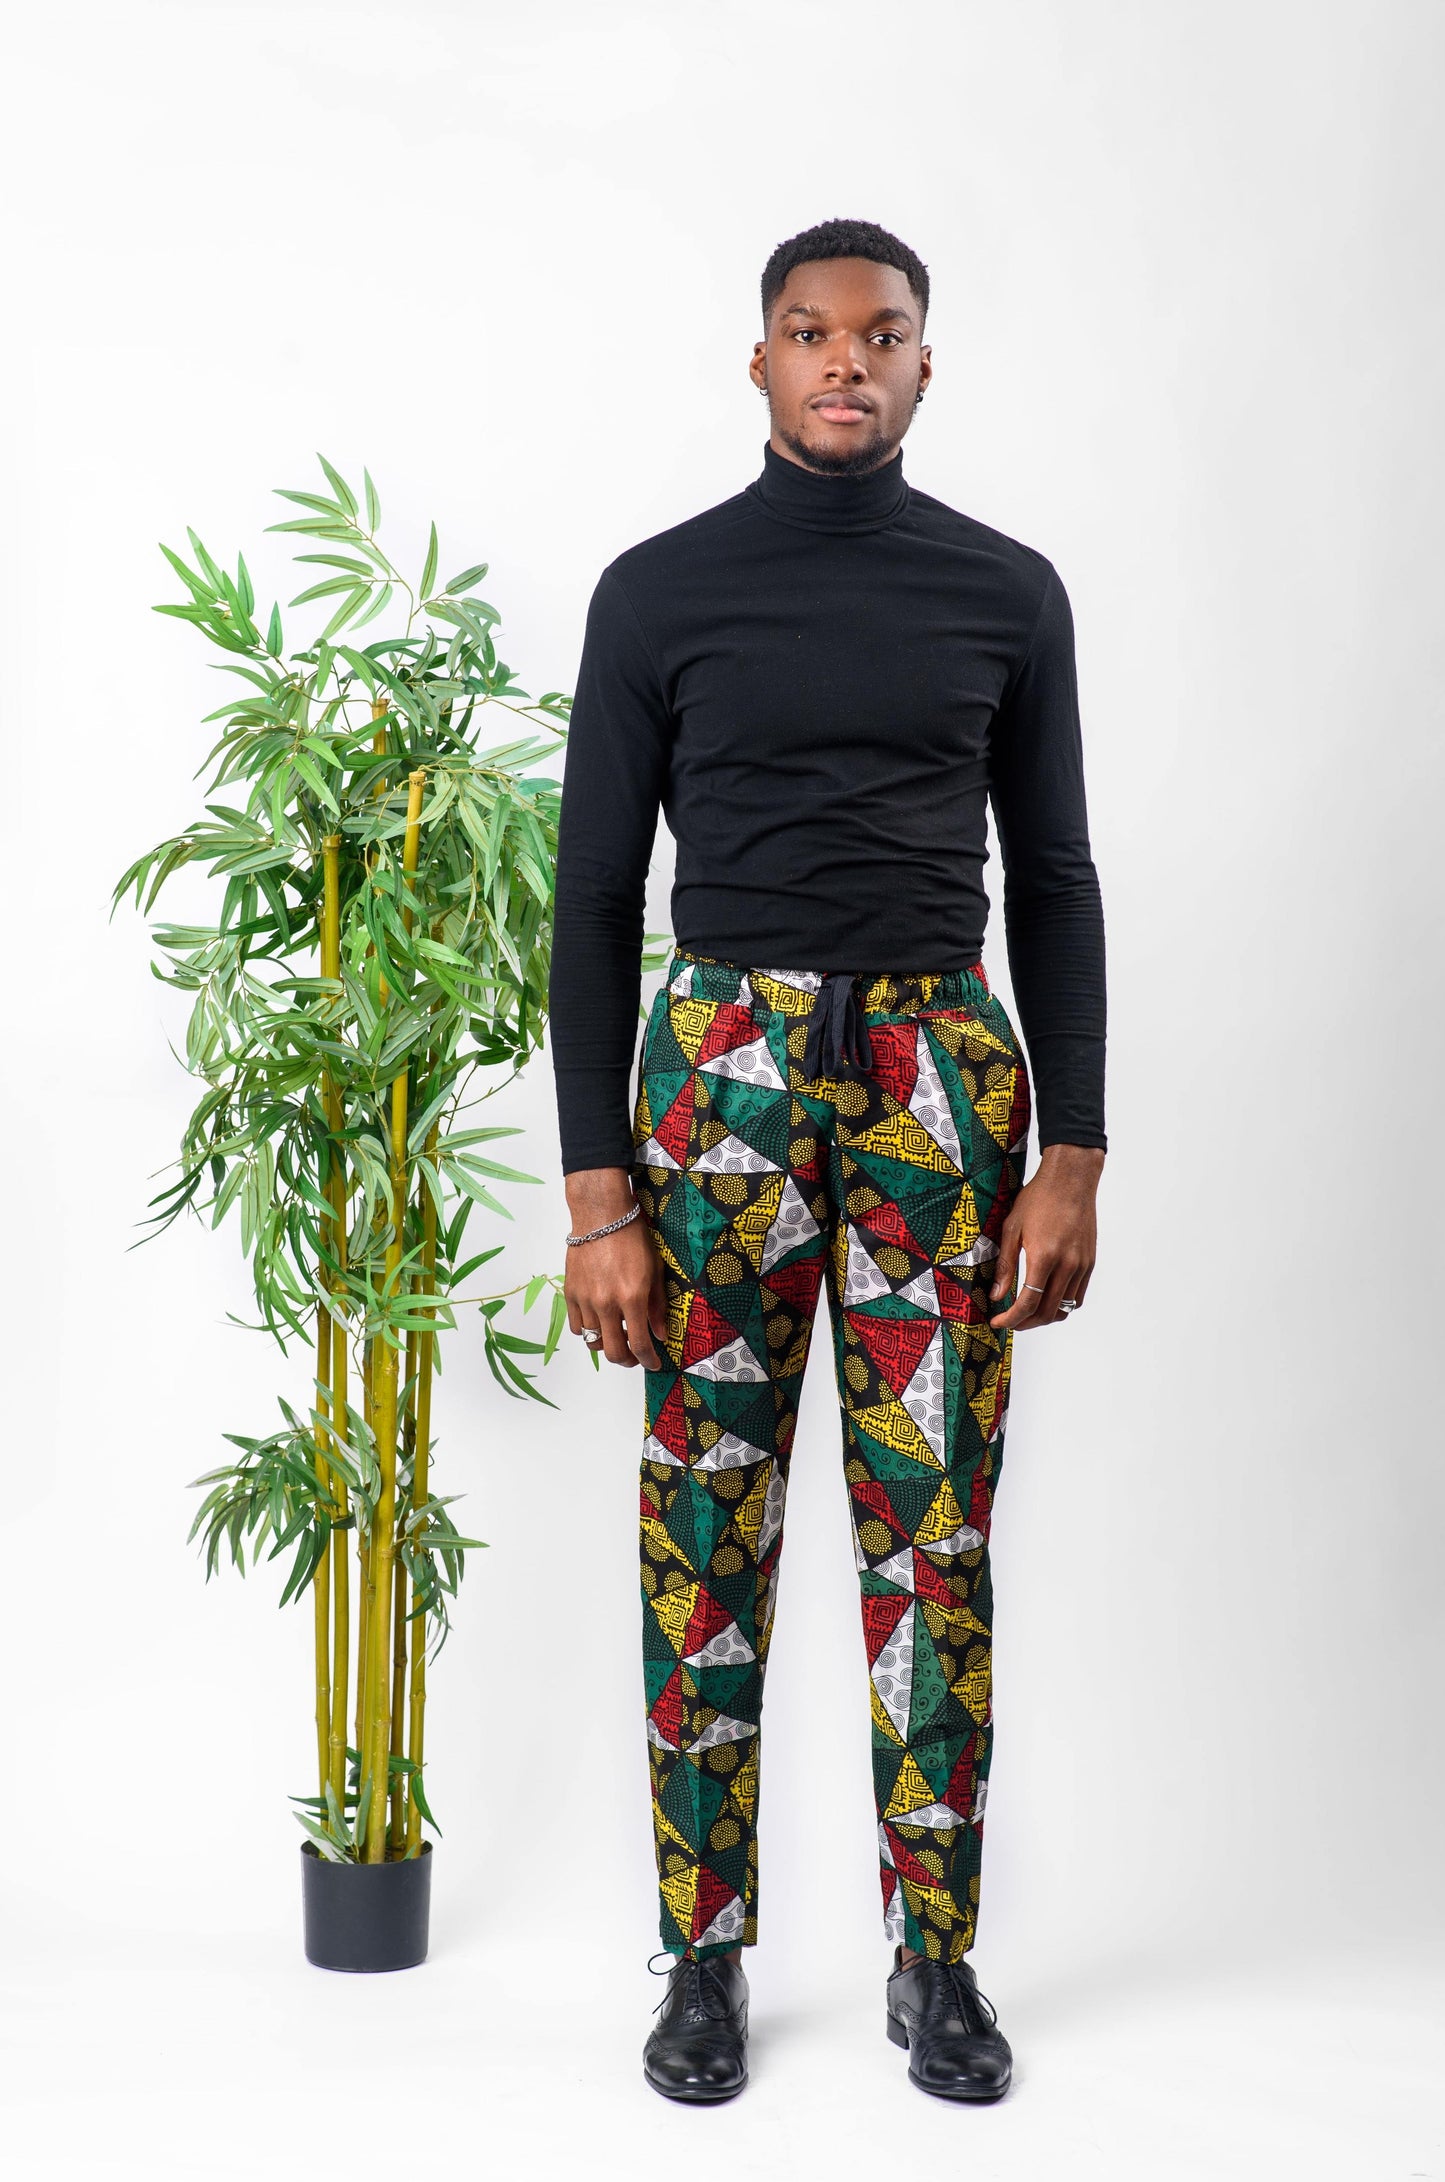 Wear your favorite tops or shirts with these simple, yet stylish African print Unisex Pants. These pants are perfect for casual wear, a night out, or even for work. These pants have a straight leg and are unisex, making them a great option for the whole family. Ankara Unisex Pants